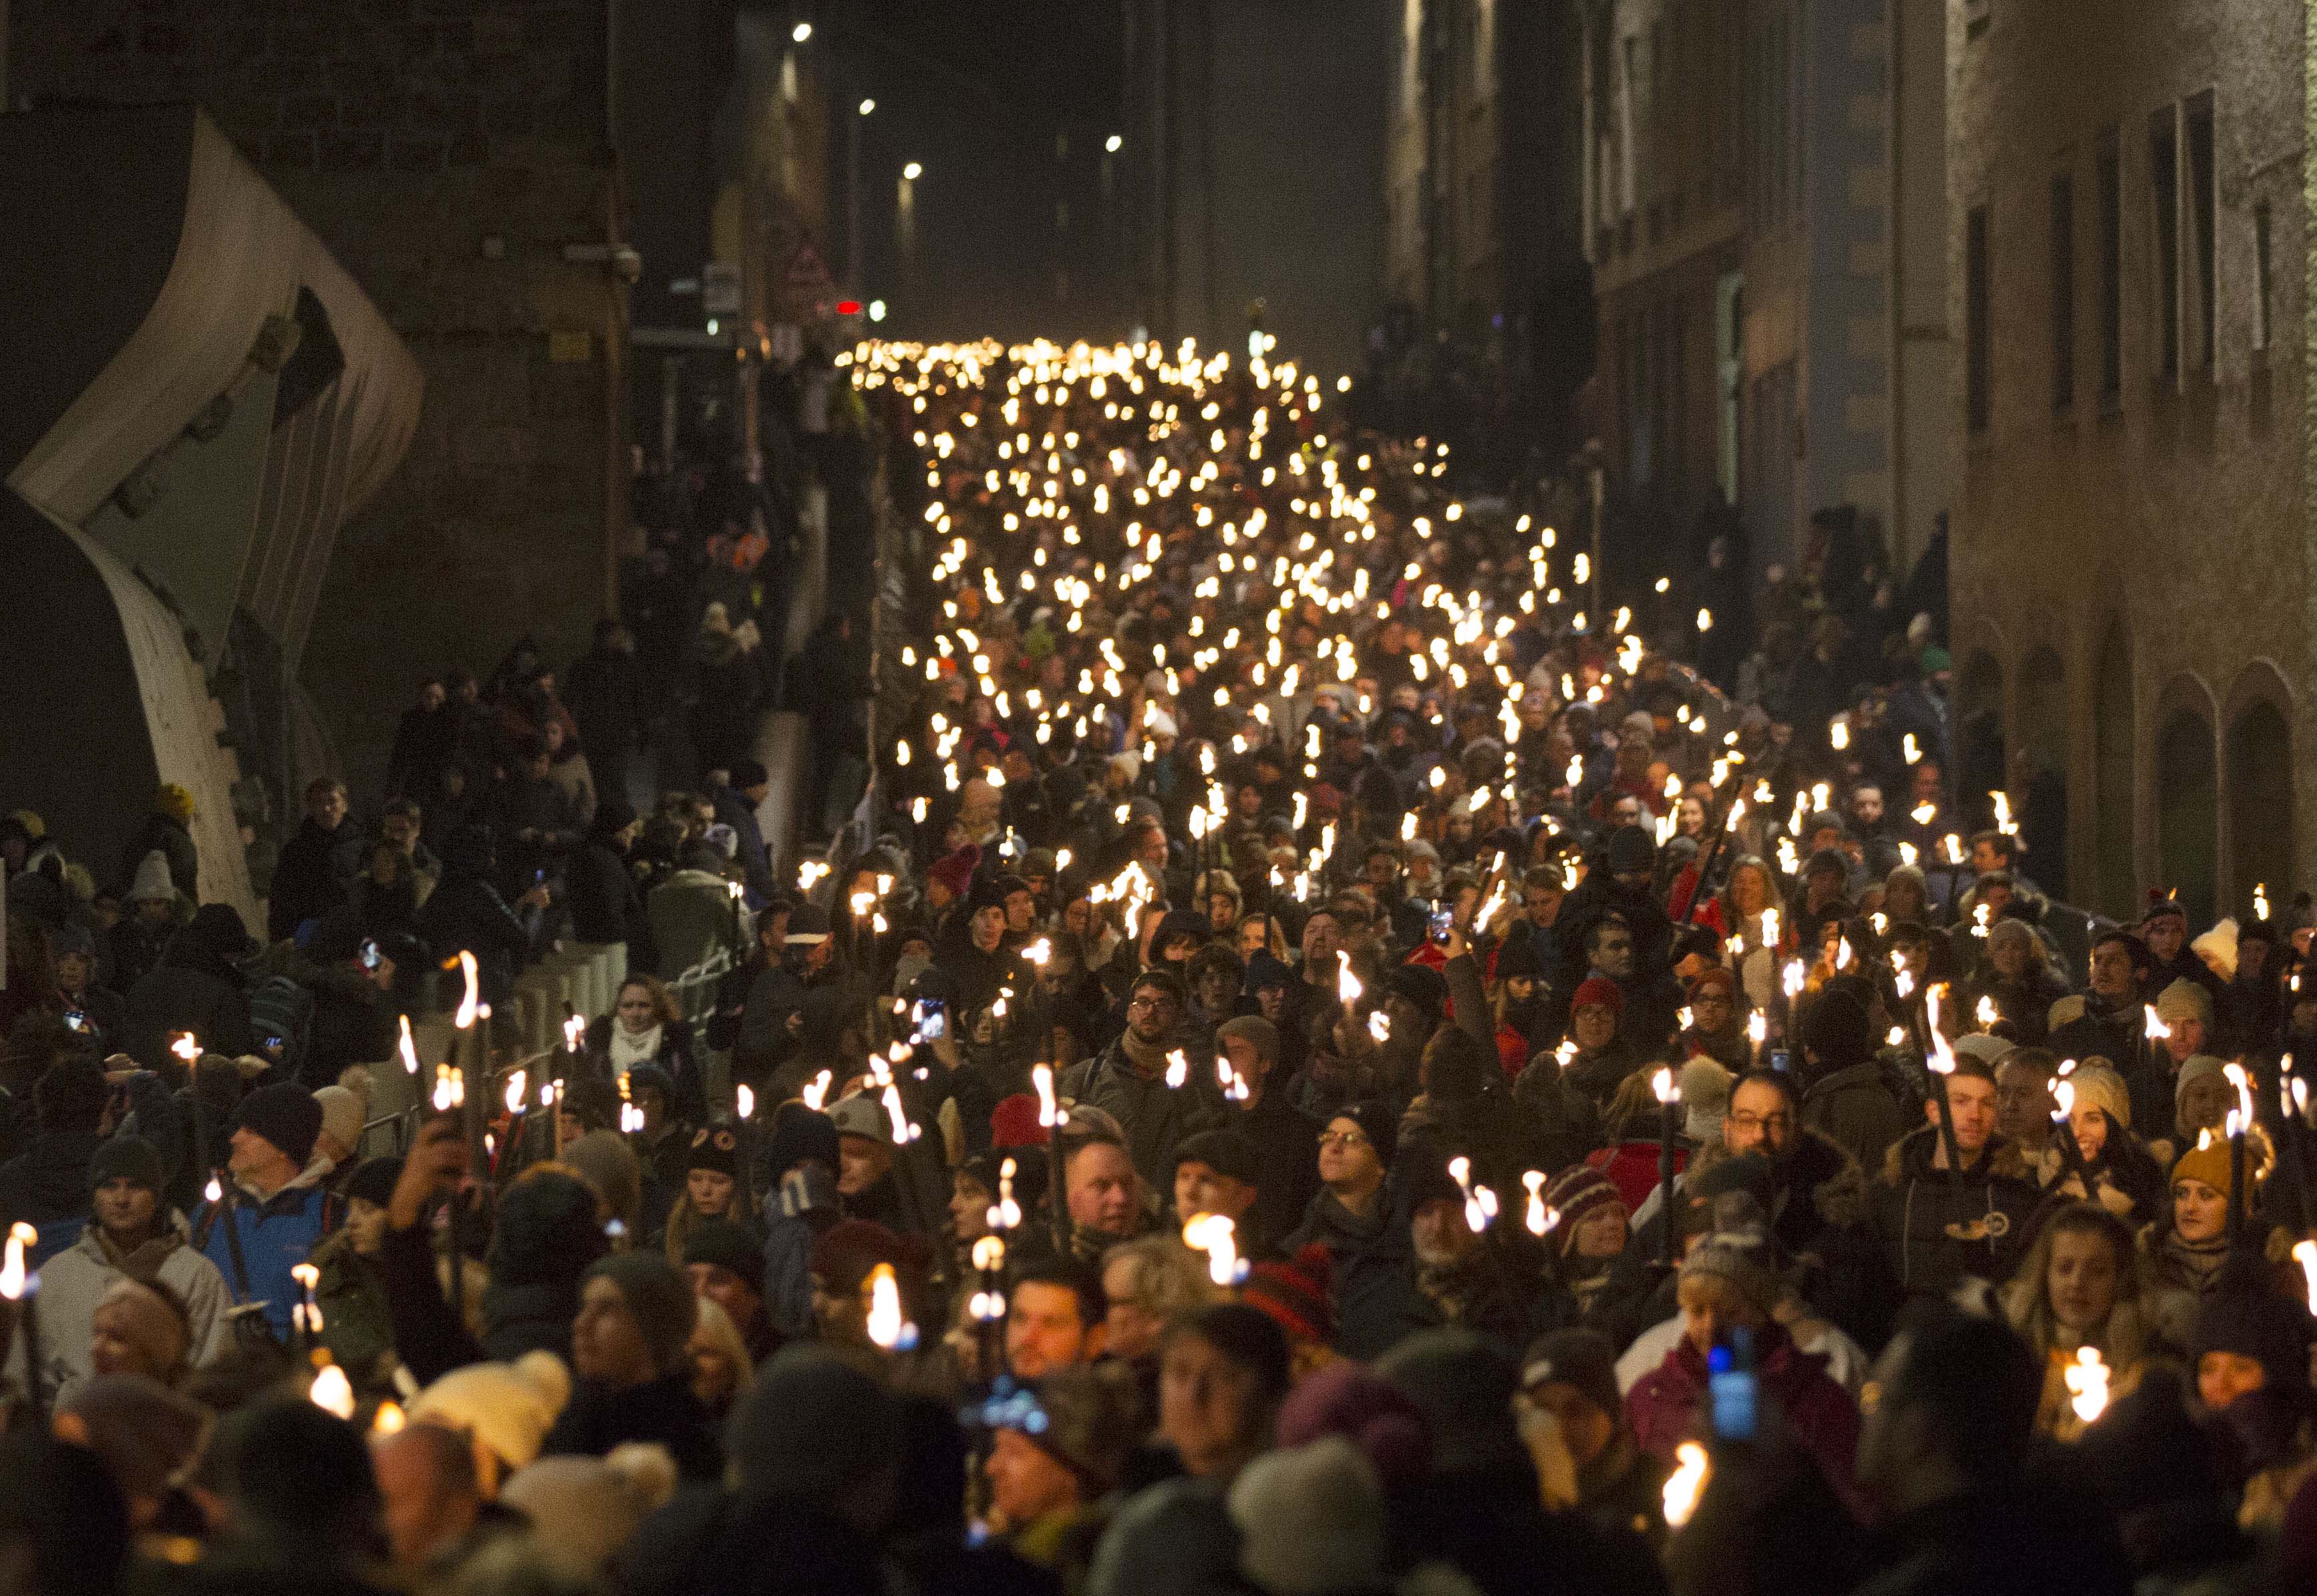 Torchlight Procession To Return to Four Day Hogmanay 2023/2024 Programme